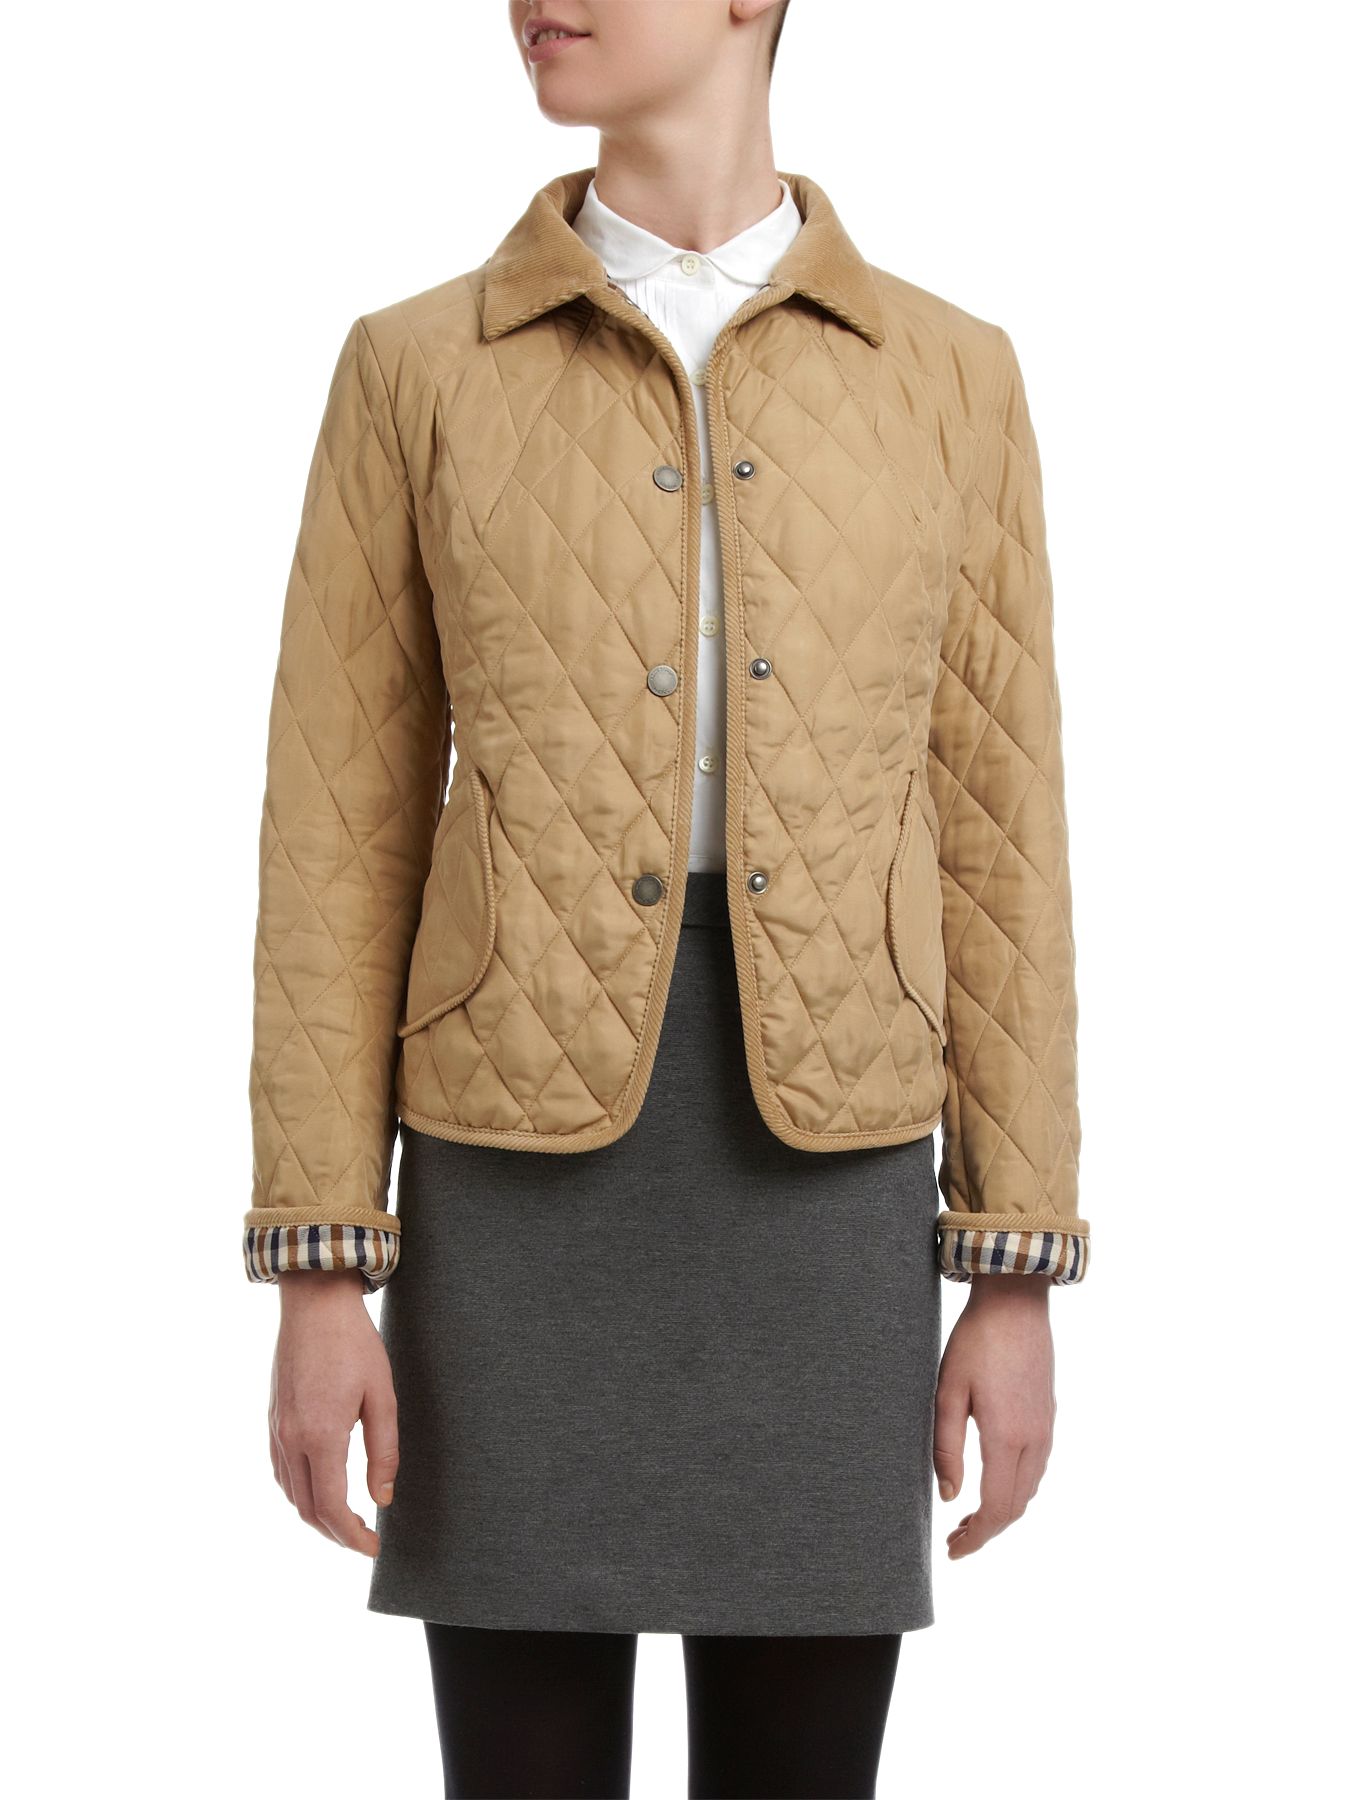 Aquascutum Short Fitted Quilted Jacket, Camel at John Lewis